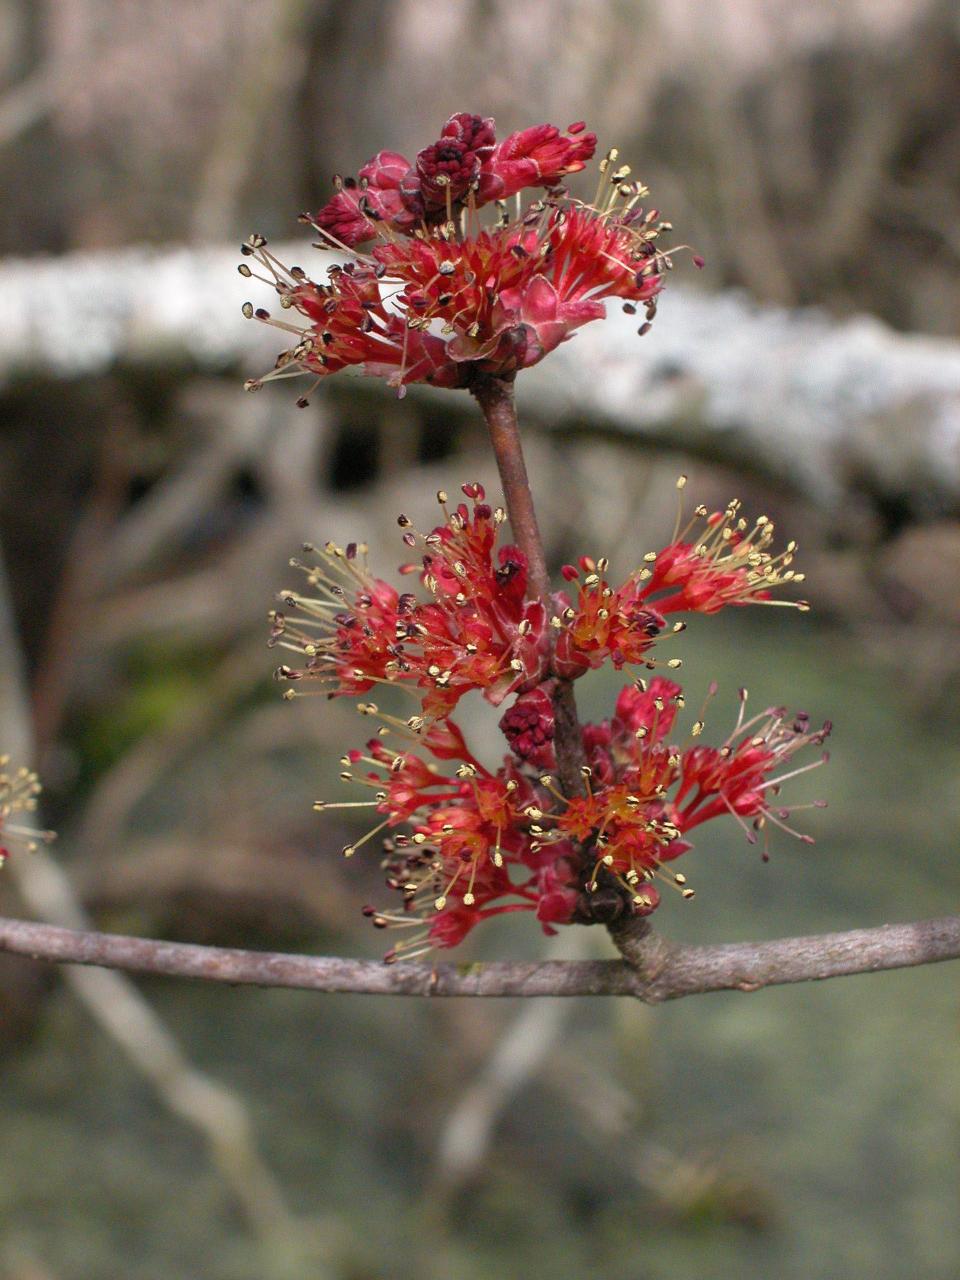 An individual red maple tree will generally have only male flowers, as in this photo, producing plenty of pollen, or female flowers, which eventually produce red, winged, one-seeded fruits.